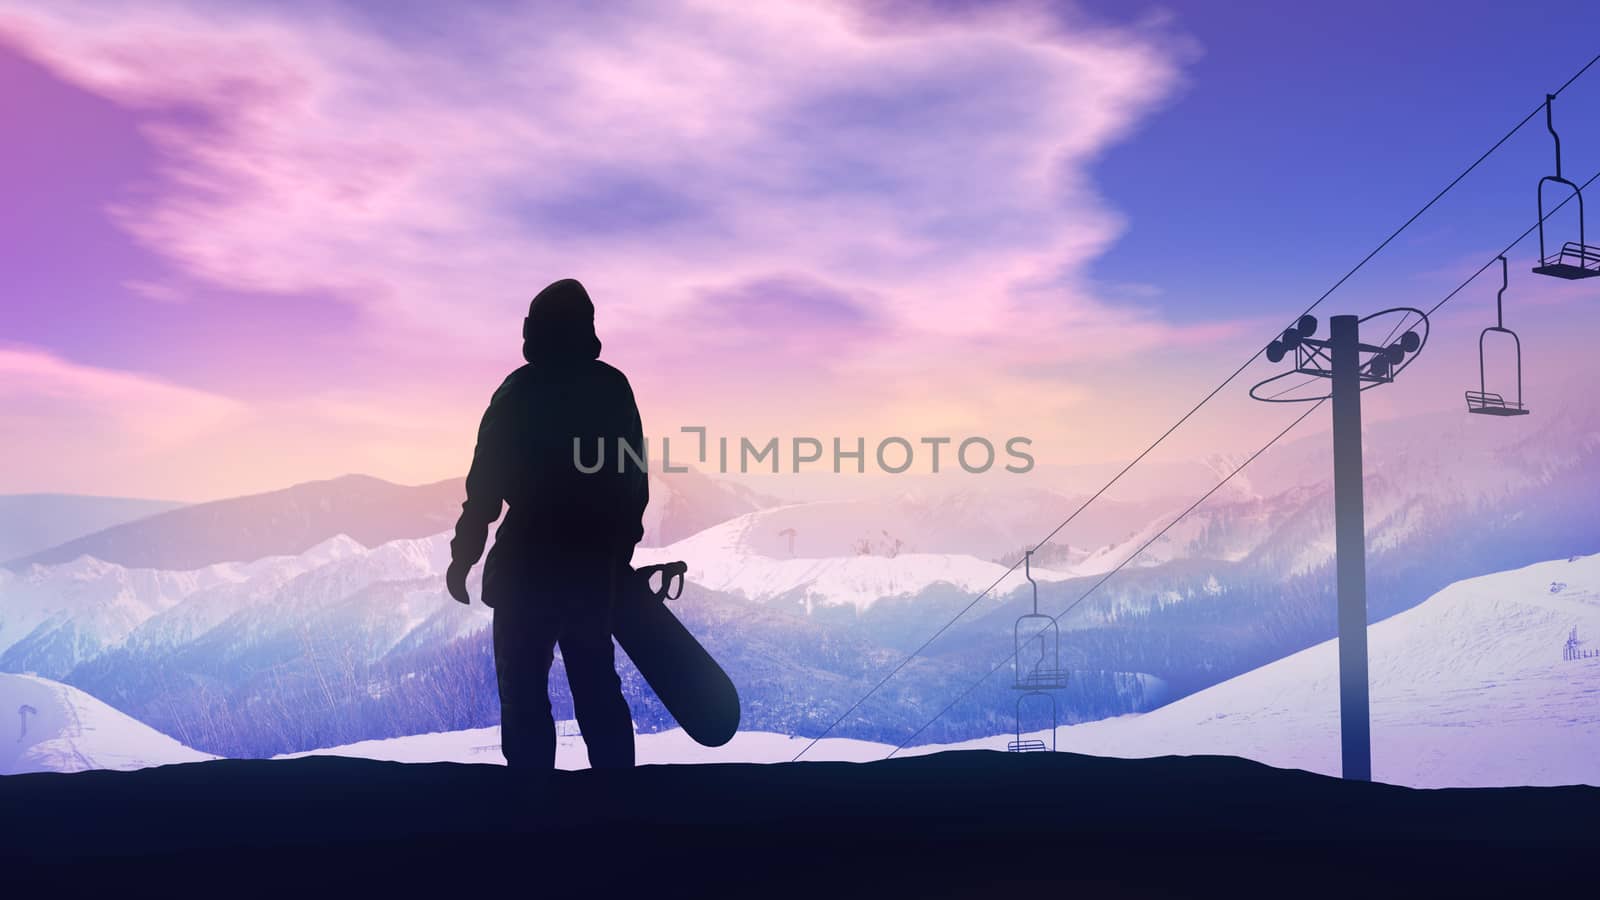 Snowboarder watching the sunset over the mountains. by ConceptCafe